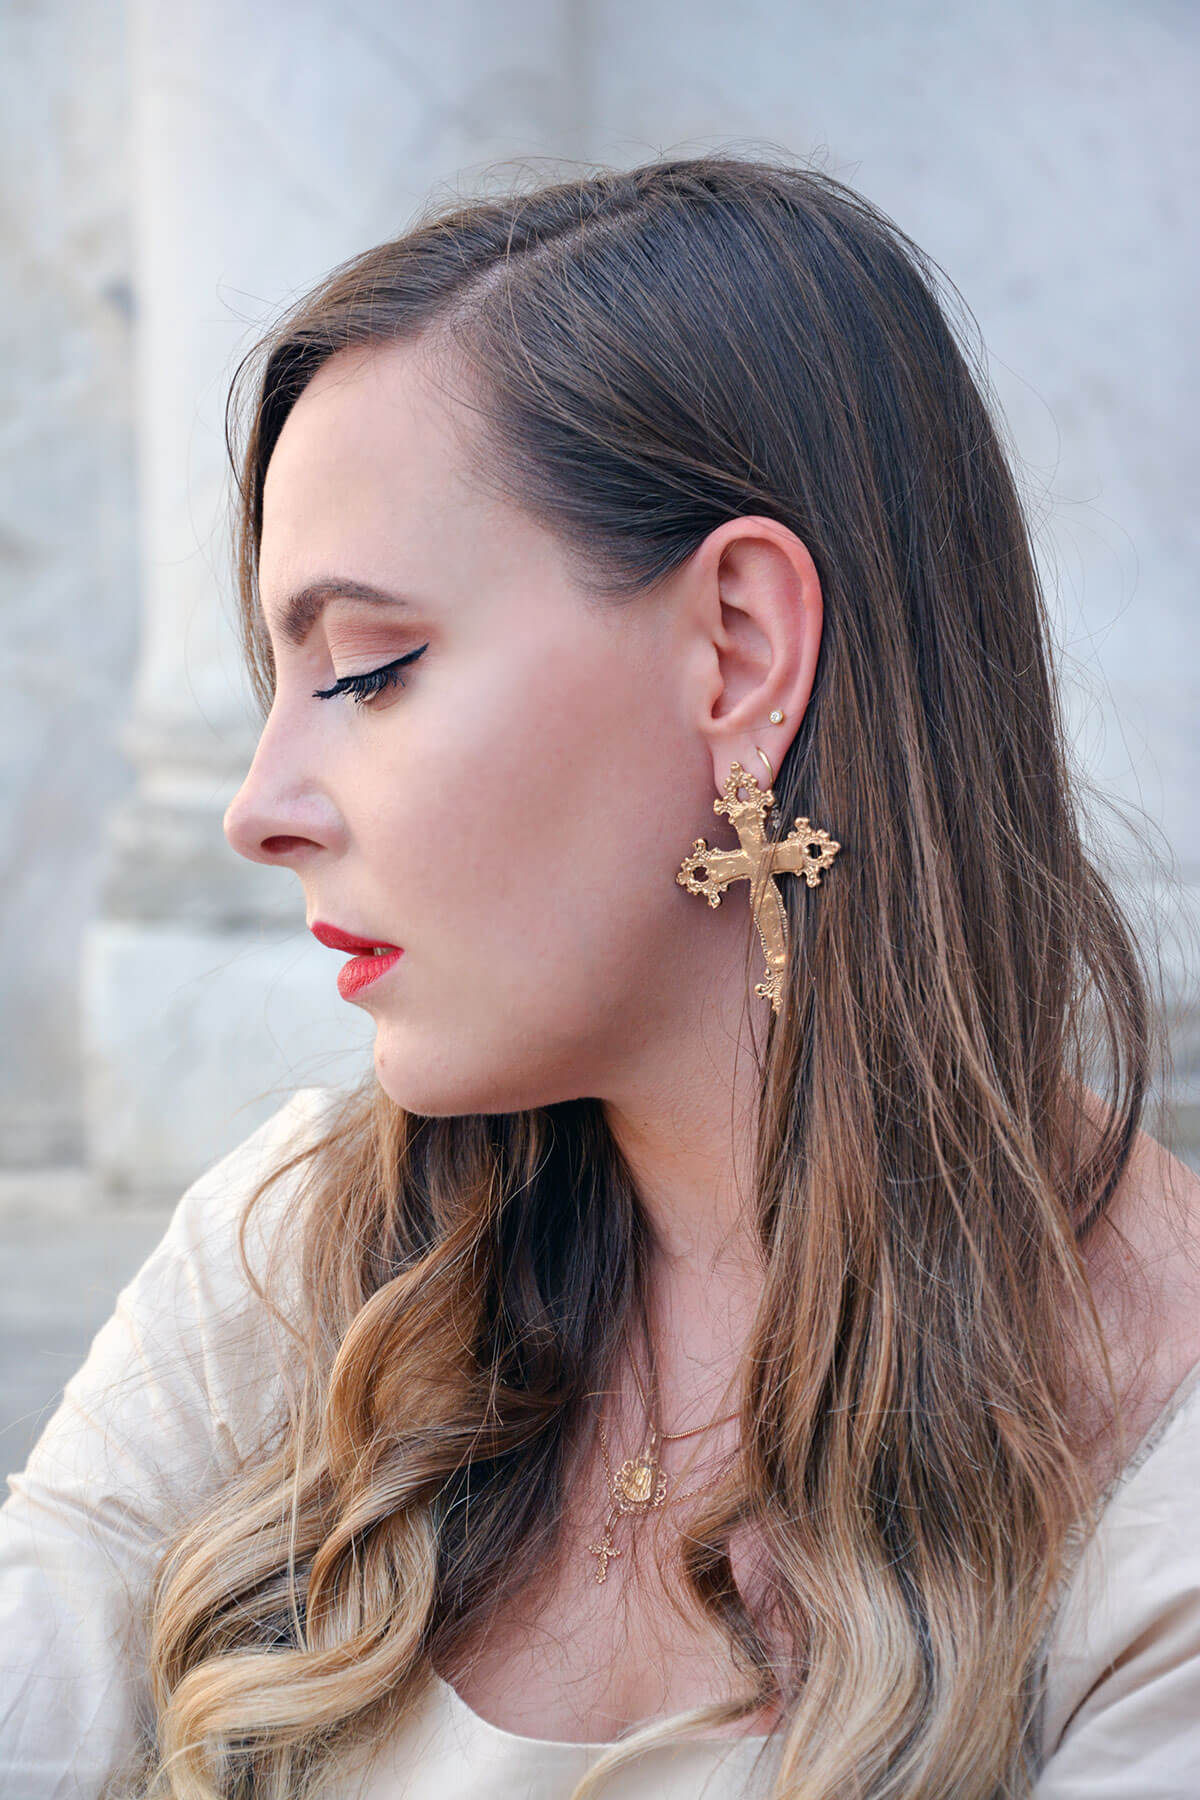 Edita in Lucca Tuscany wearing Cross earrings and rose gold jewellery 9